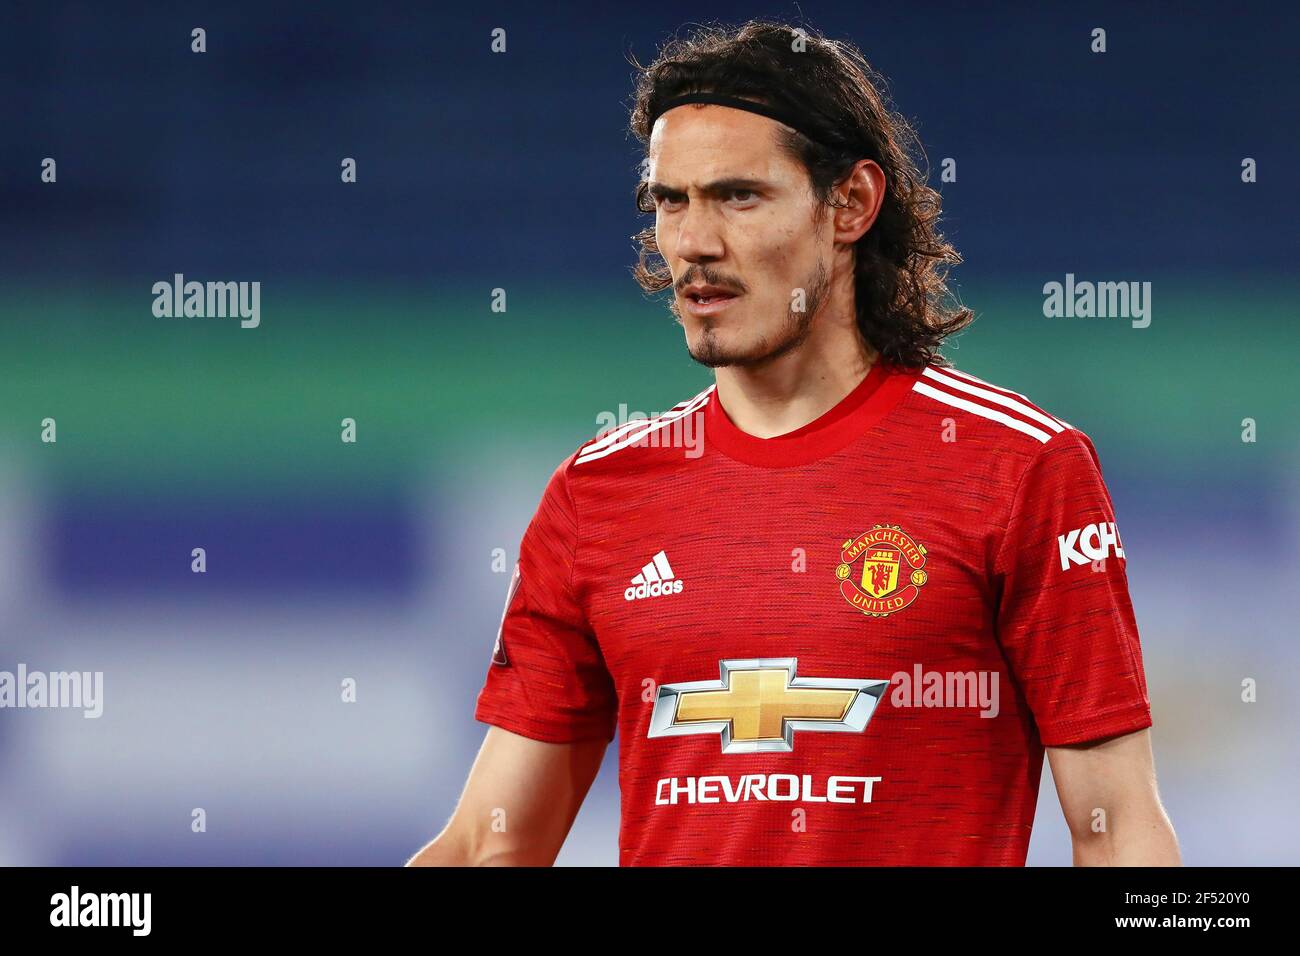 Edinson Cavani of Manchester United - Leicester City v Manchester United, The Emirates FA Cup sixth round quarter final, King Power Stadium, Leicester, UK - 21st March 2021  Editorial Use Only - DataCo restrictions apply Stock Photo